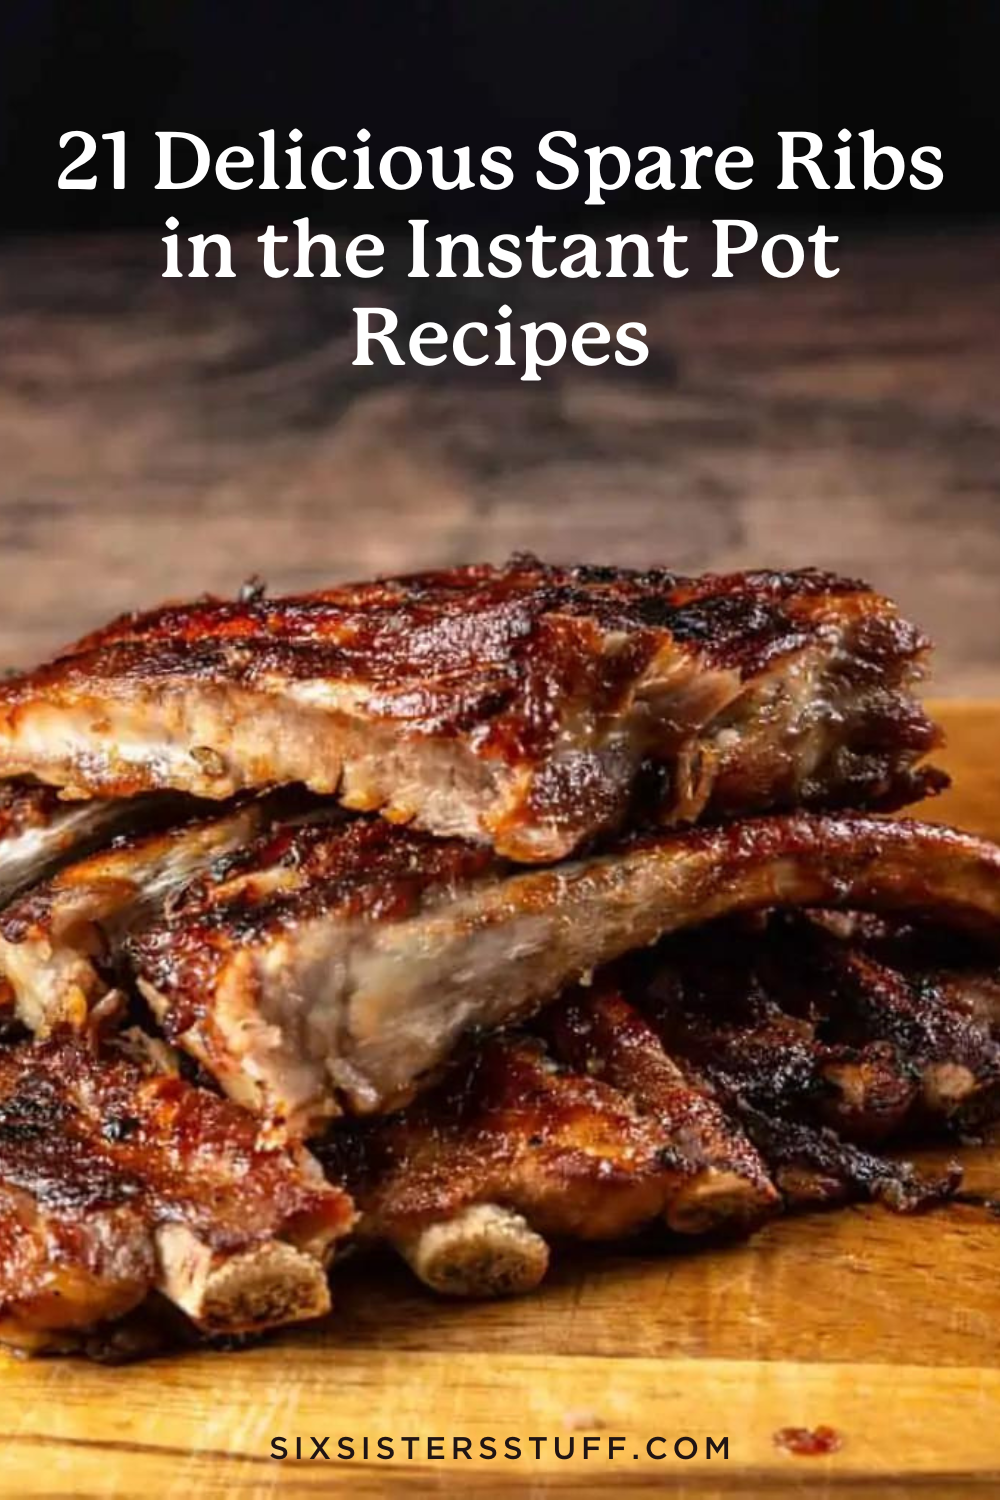 21 Delicious Spare Ribs in the Instant Pot Recipes